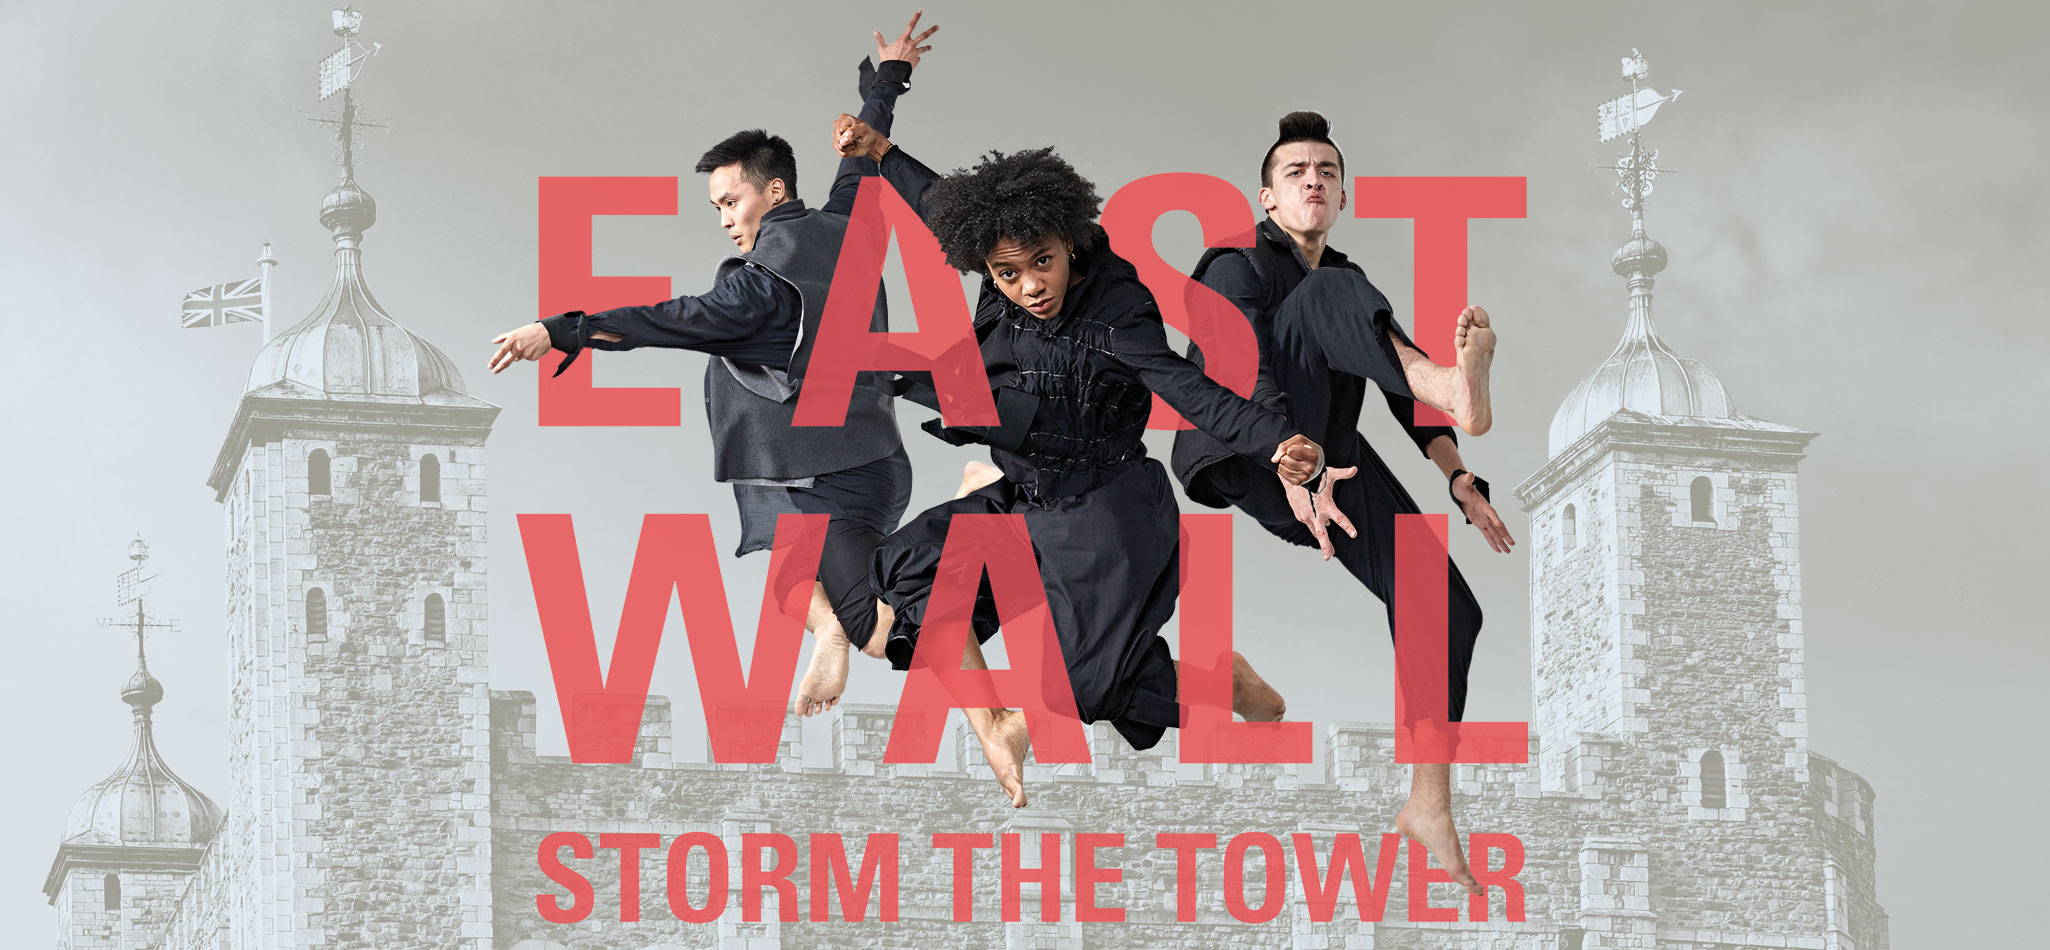 East Wall - Storm the Tower!